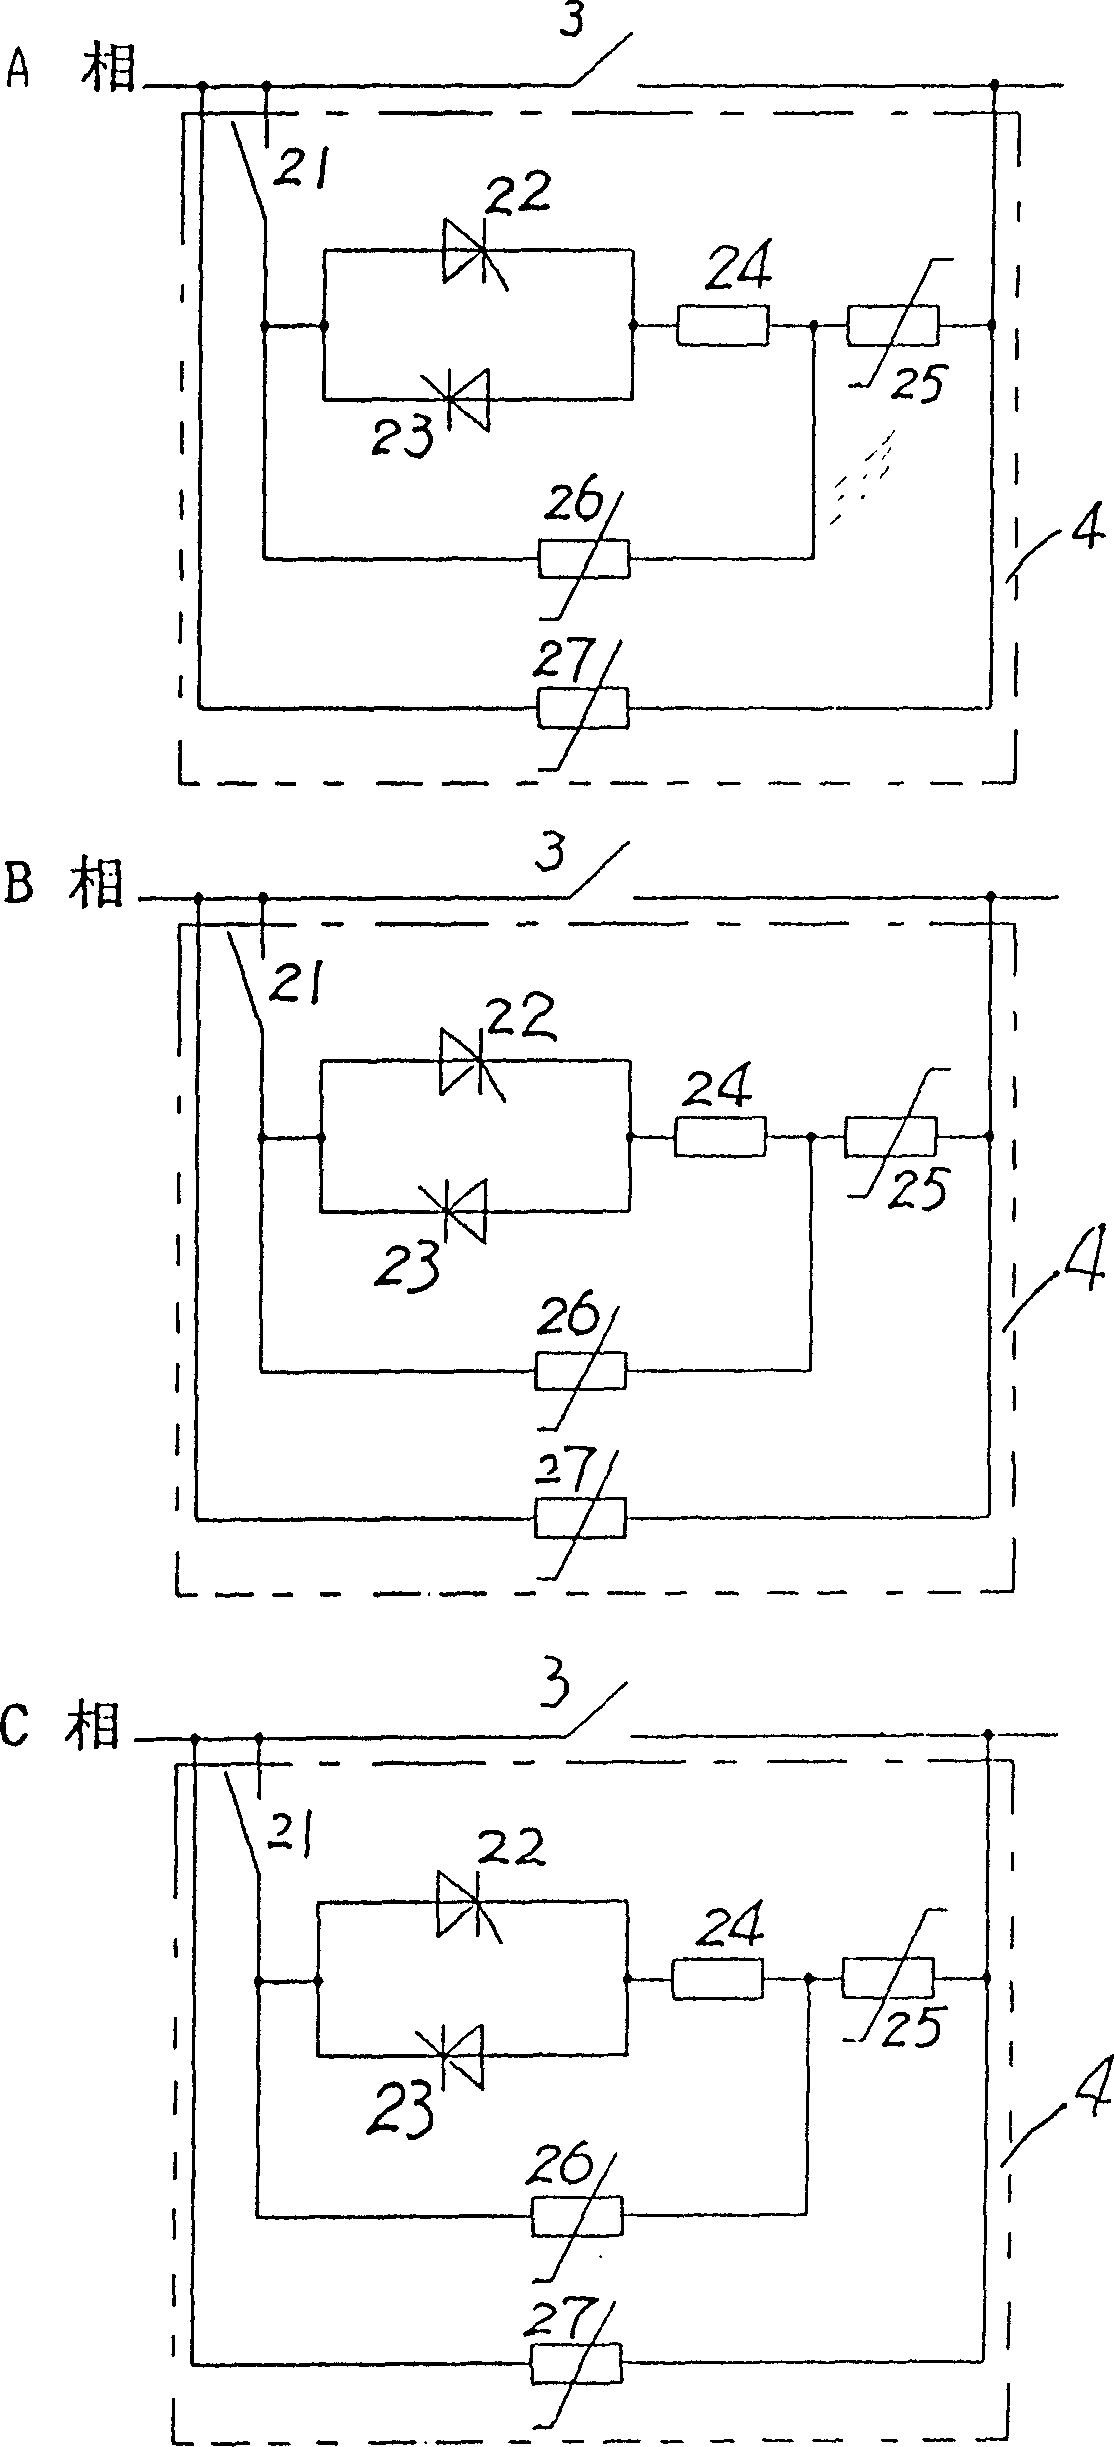 Arc-less switching circuit and method for switch apparatus